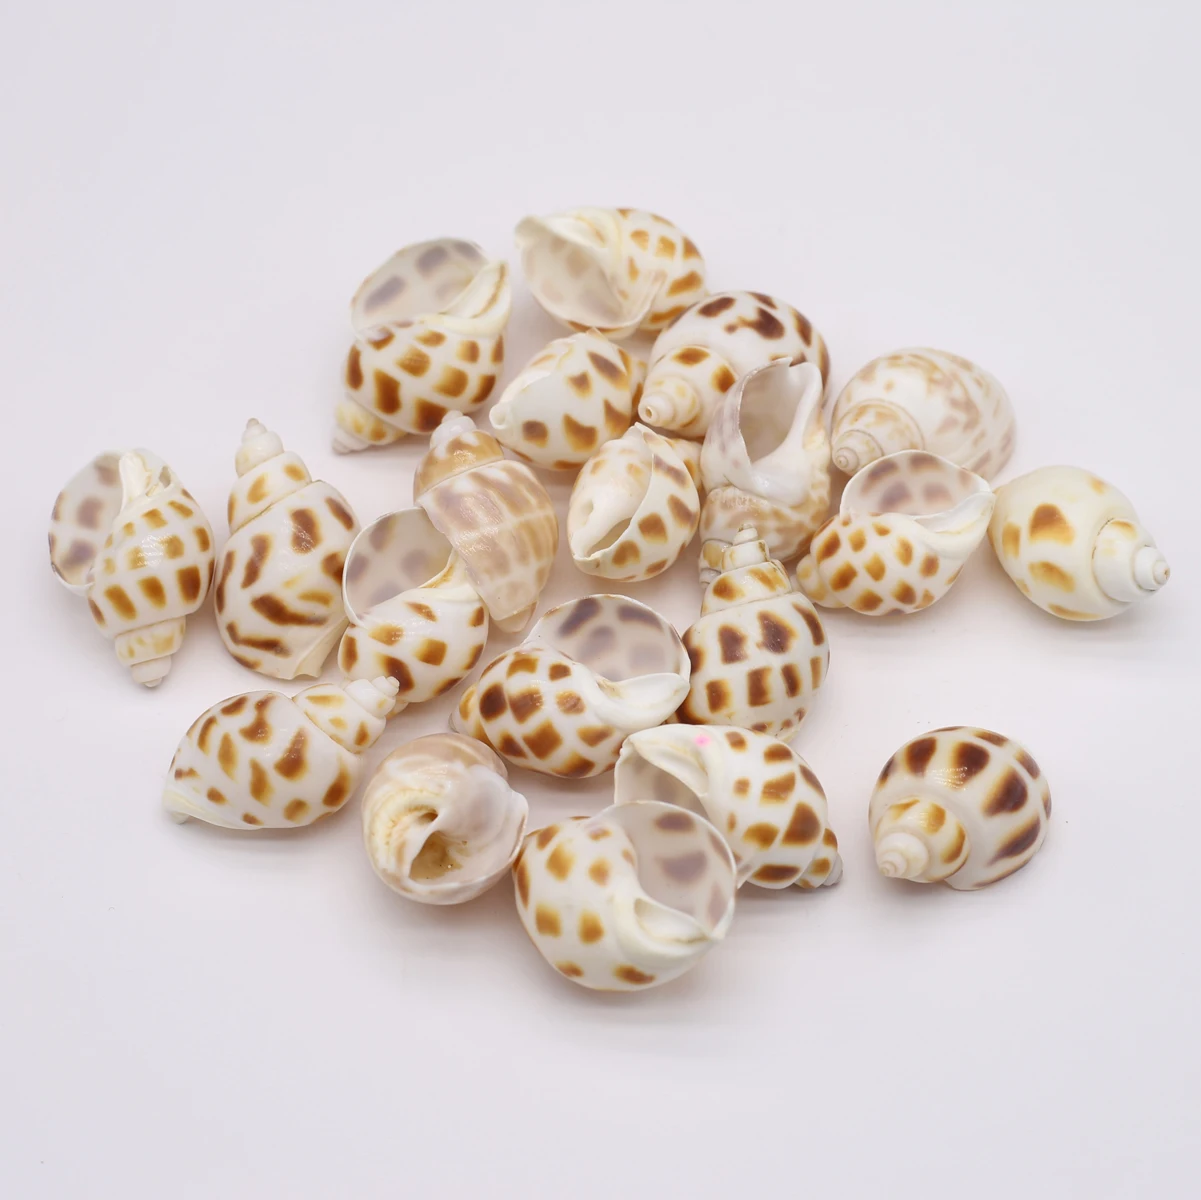 Natural Shell Beads No Hole Sea Yellow Decor Snail Charms for Jewelry Making Necklace Bracelet Ornament